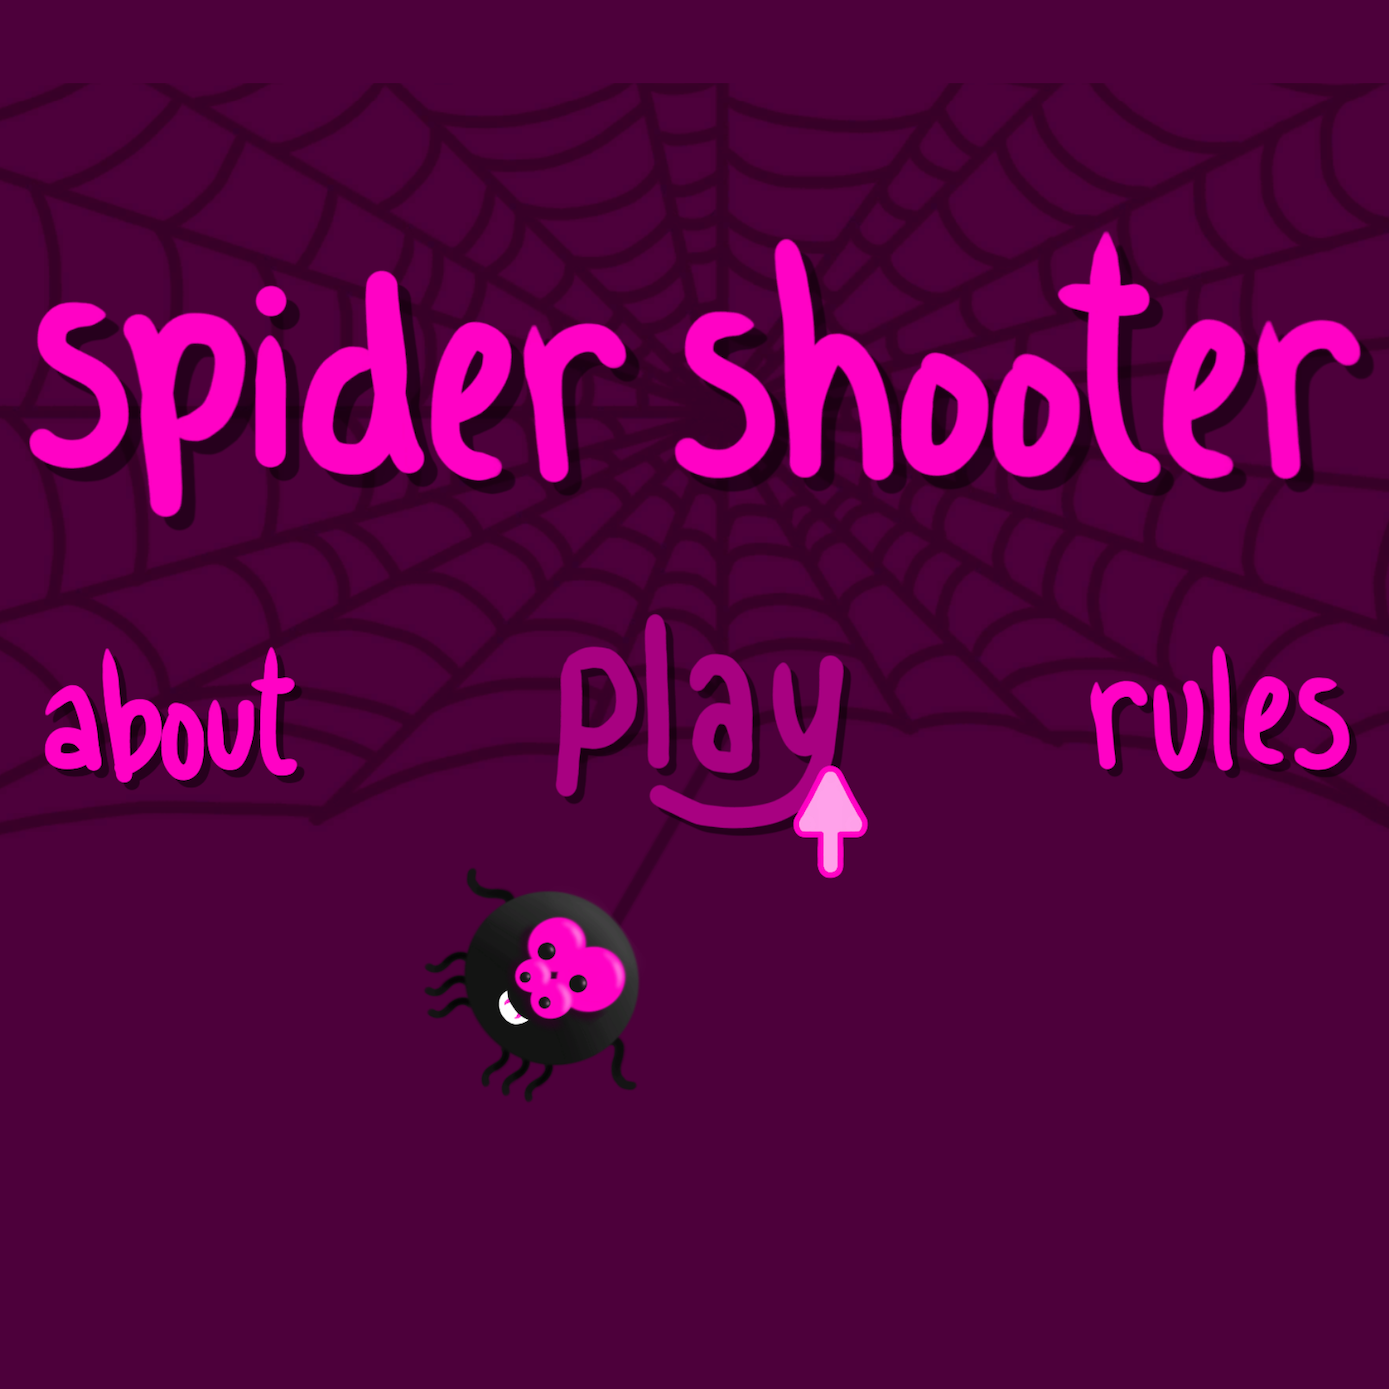 Opening screen for 2D game titled Spider Shooter. It has buttons labeled about, play, and rules. There is a cartoon spider hanging down from a spider web in the background.